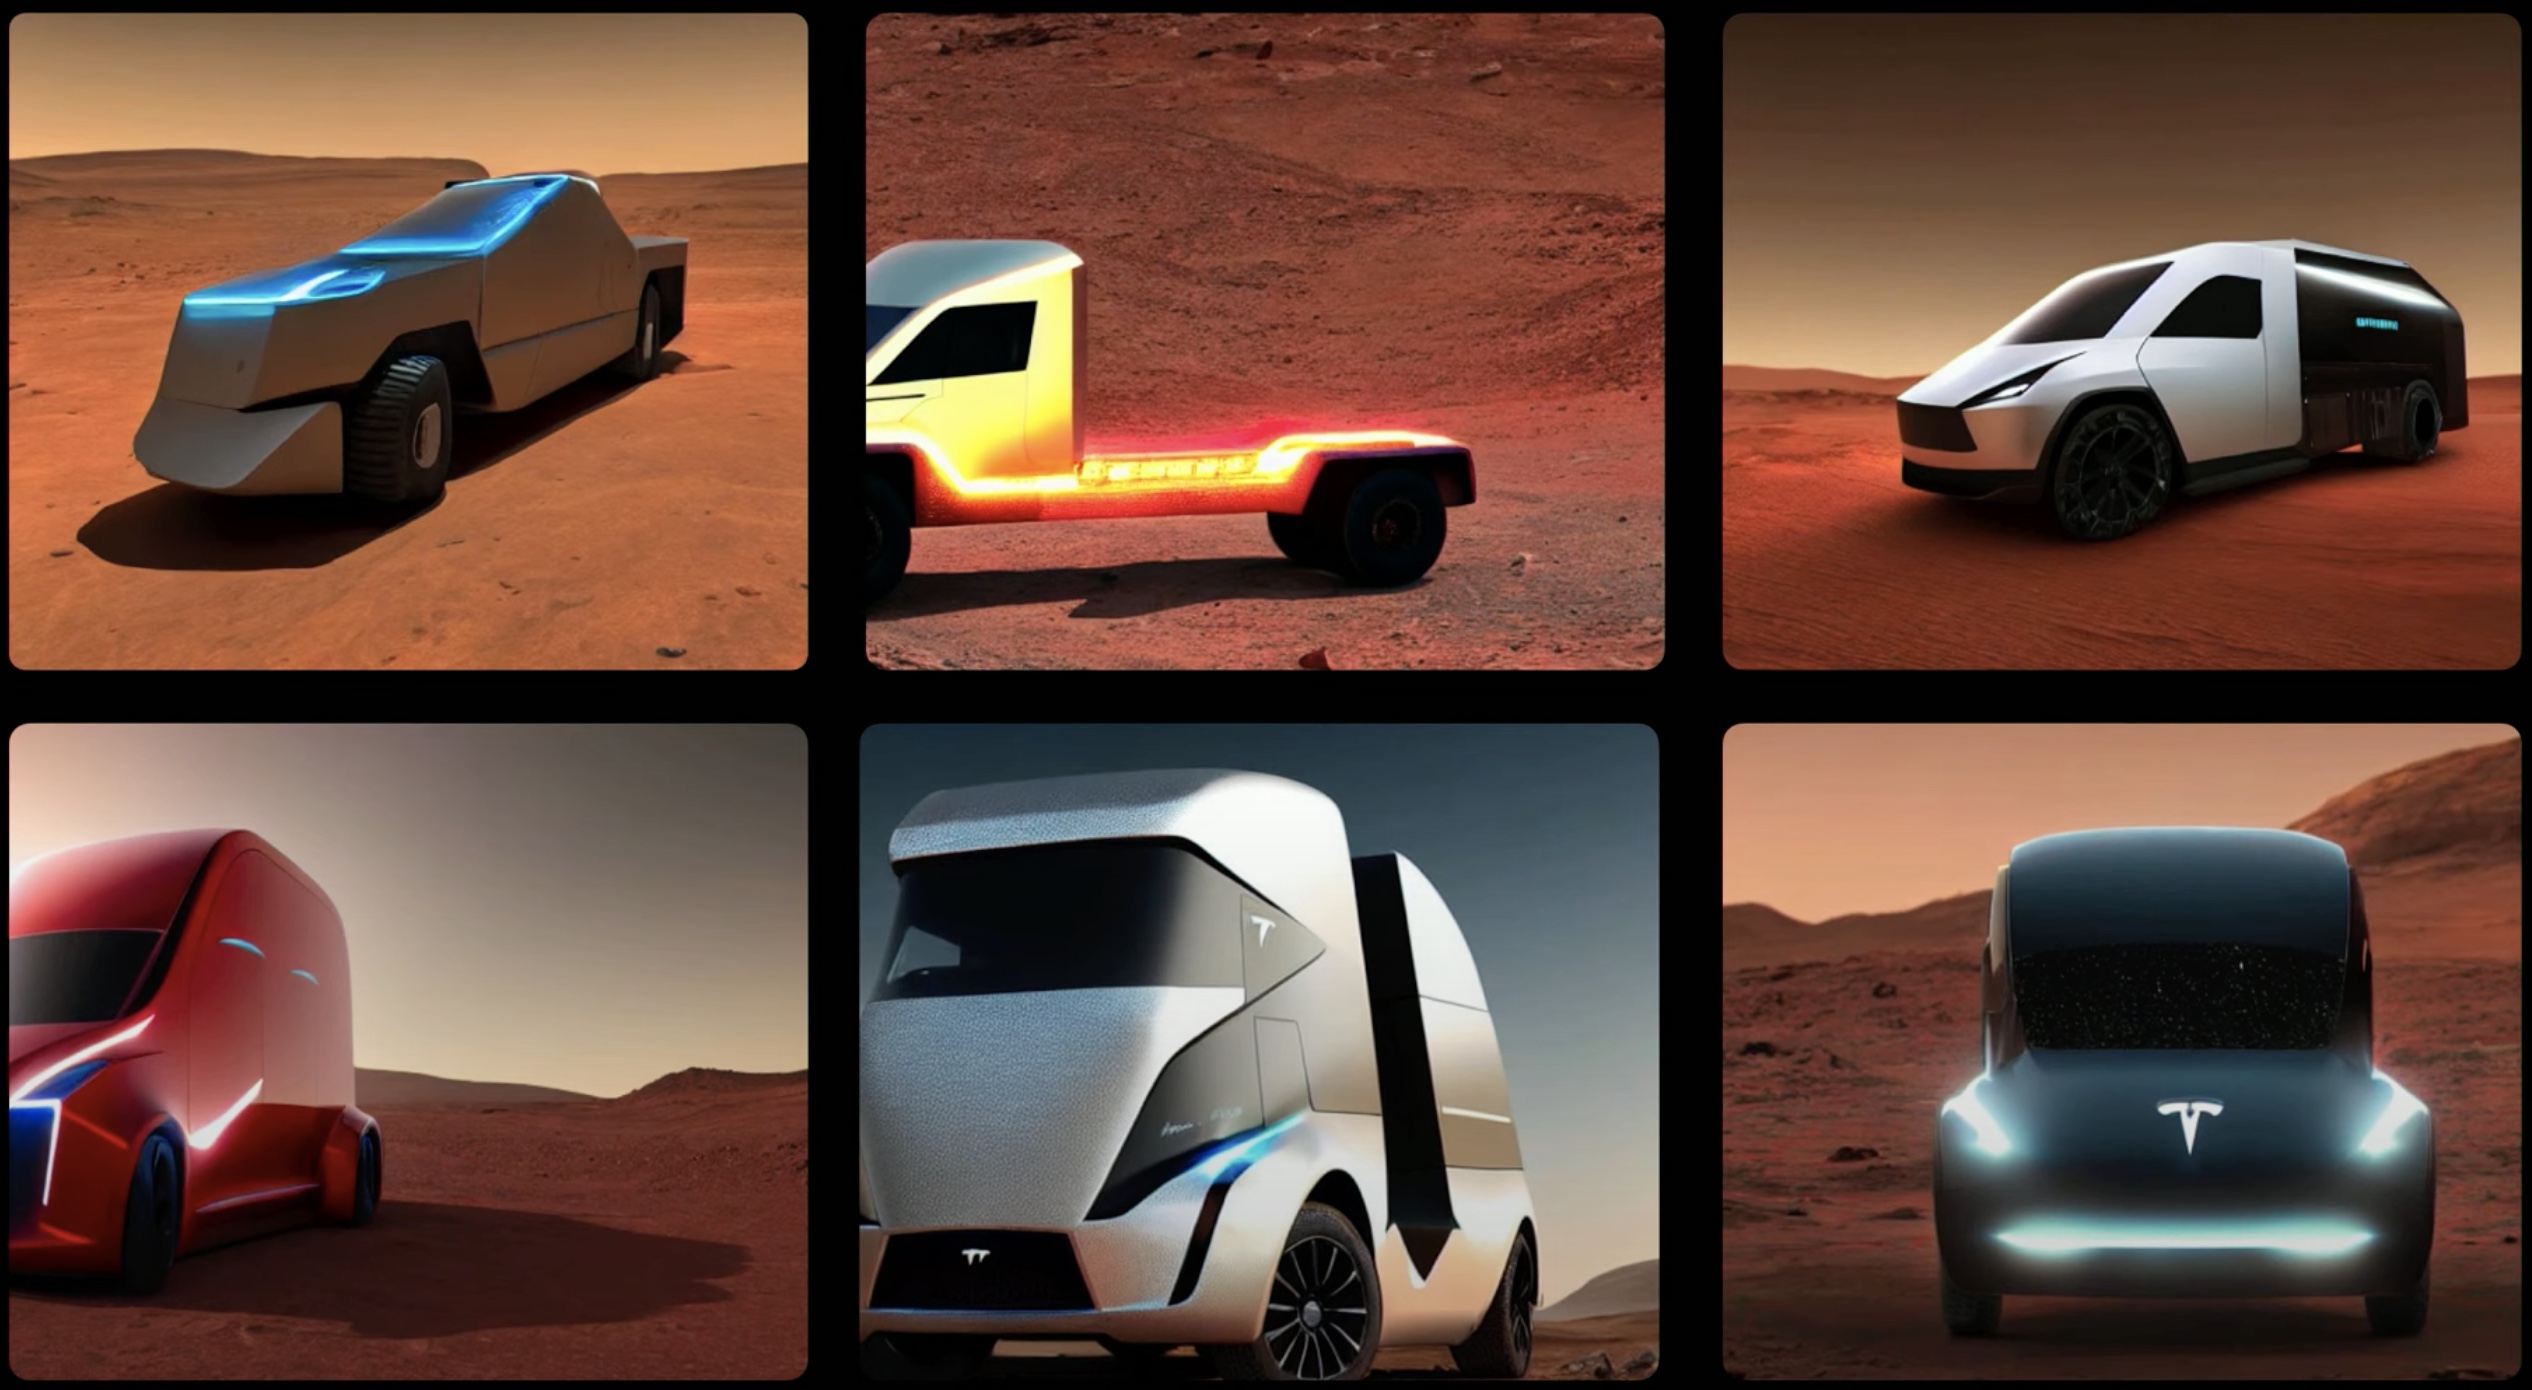 Tesla unveils 'Cybertruck on Mars' designs generated by its AI